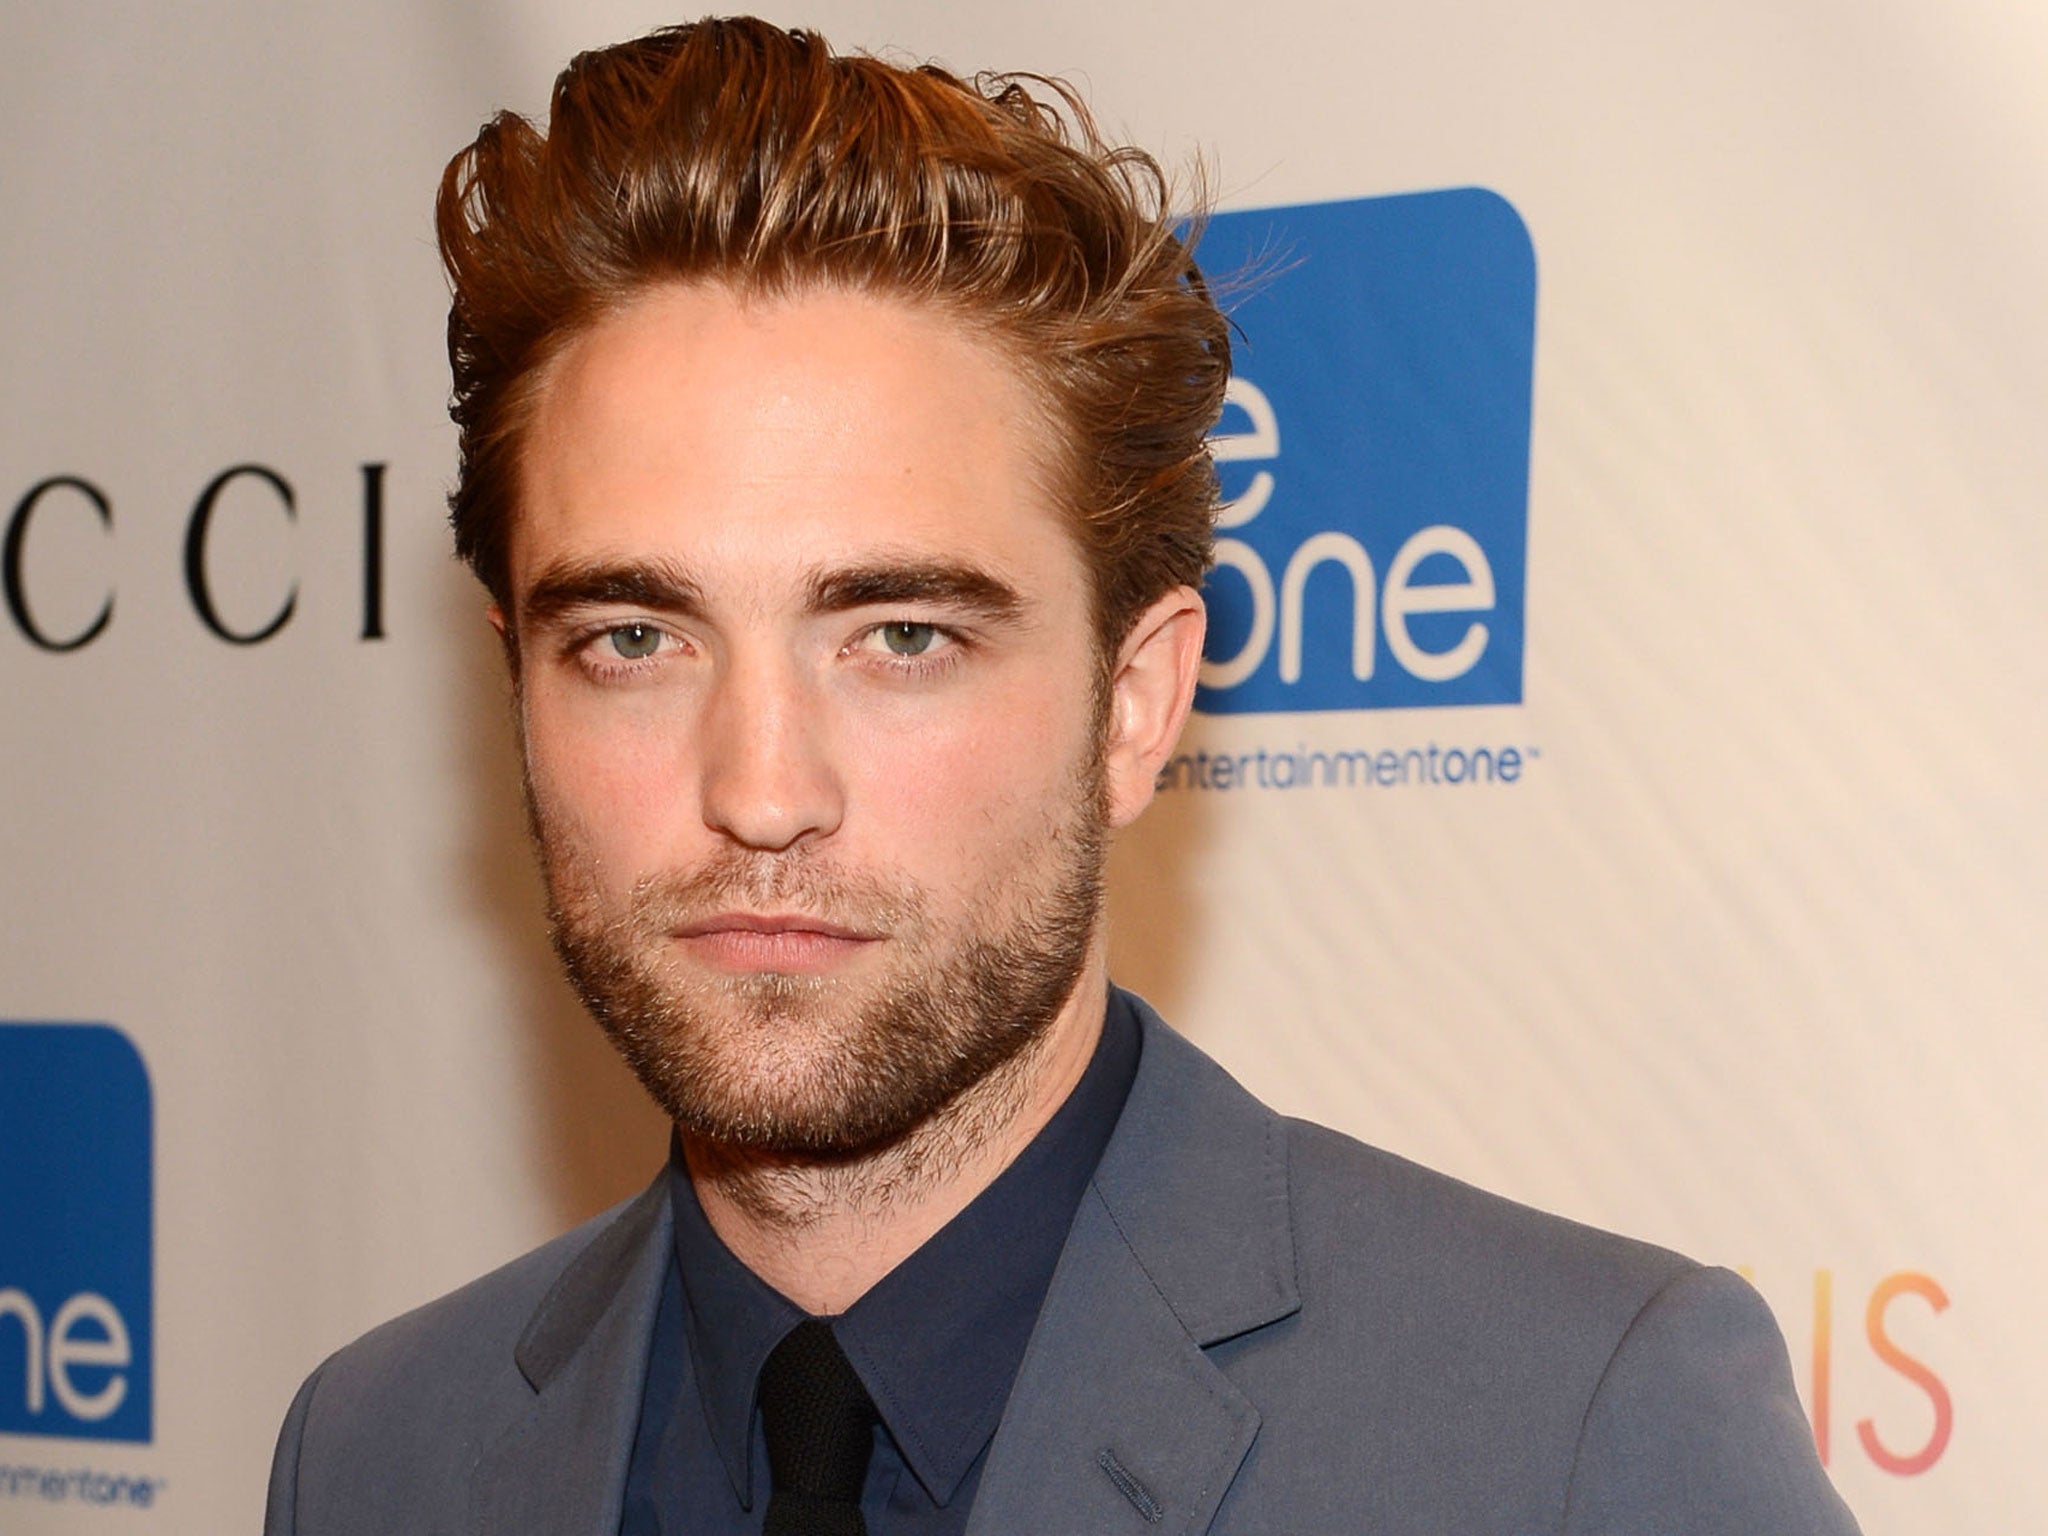 Robert Pattinson's jaw line is the most requested surgery for men